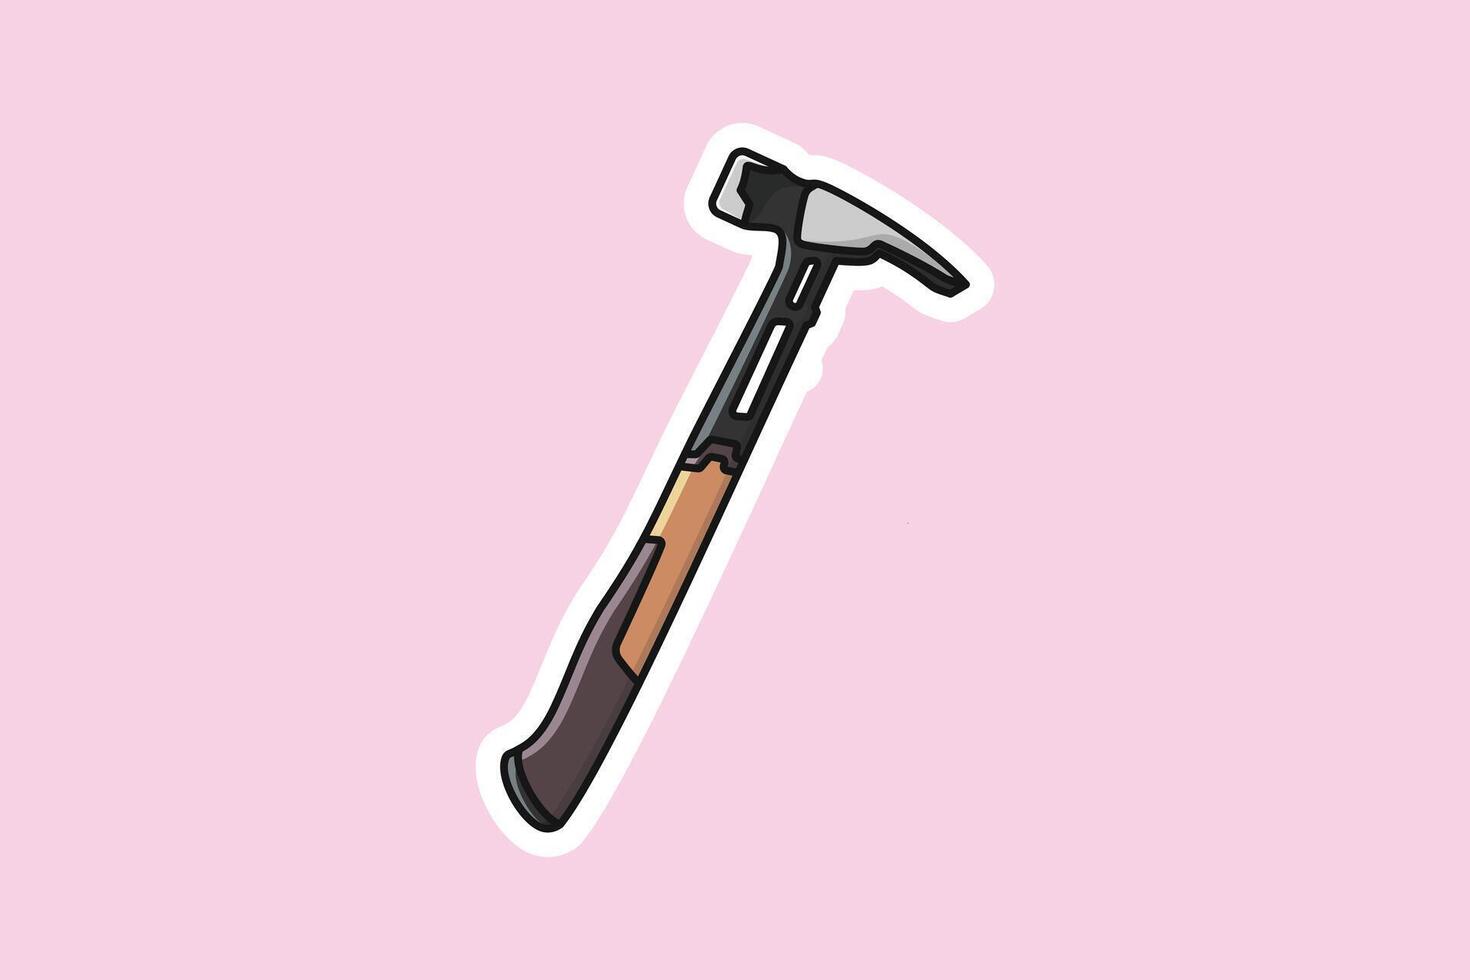 Carpenter Hammer Tool Sticker vector illustration. Carpentry and Construction working tools object icon concept. Hammer with orange plastic handle sticker design logo.